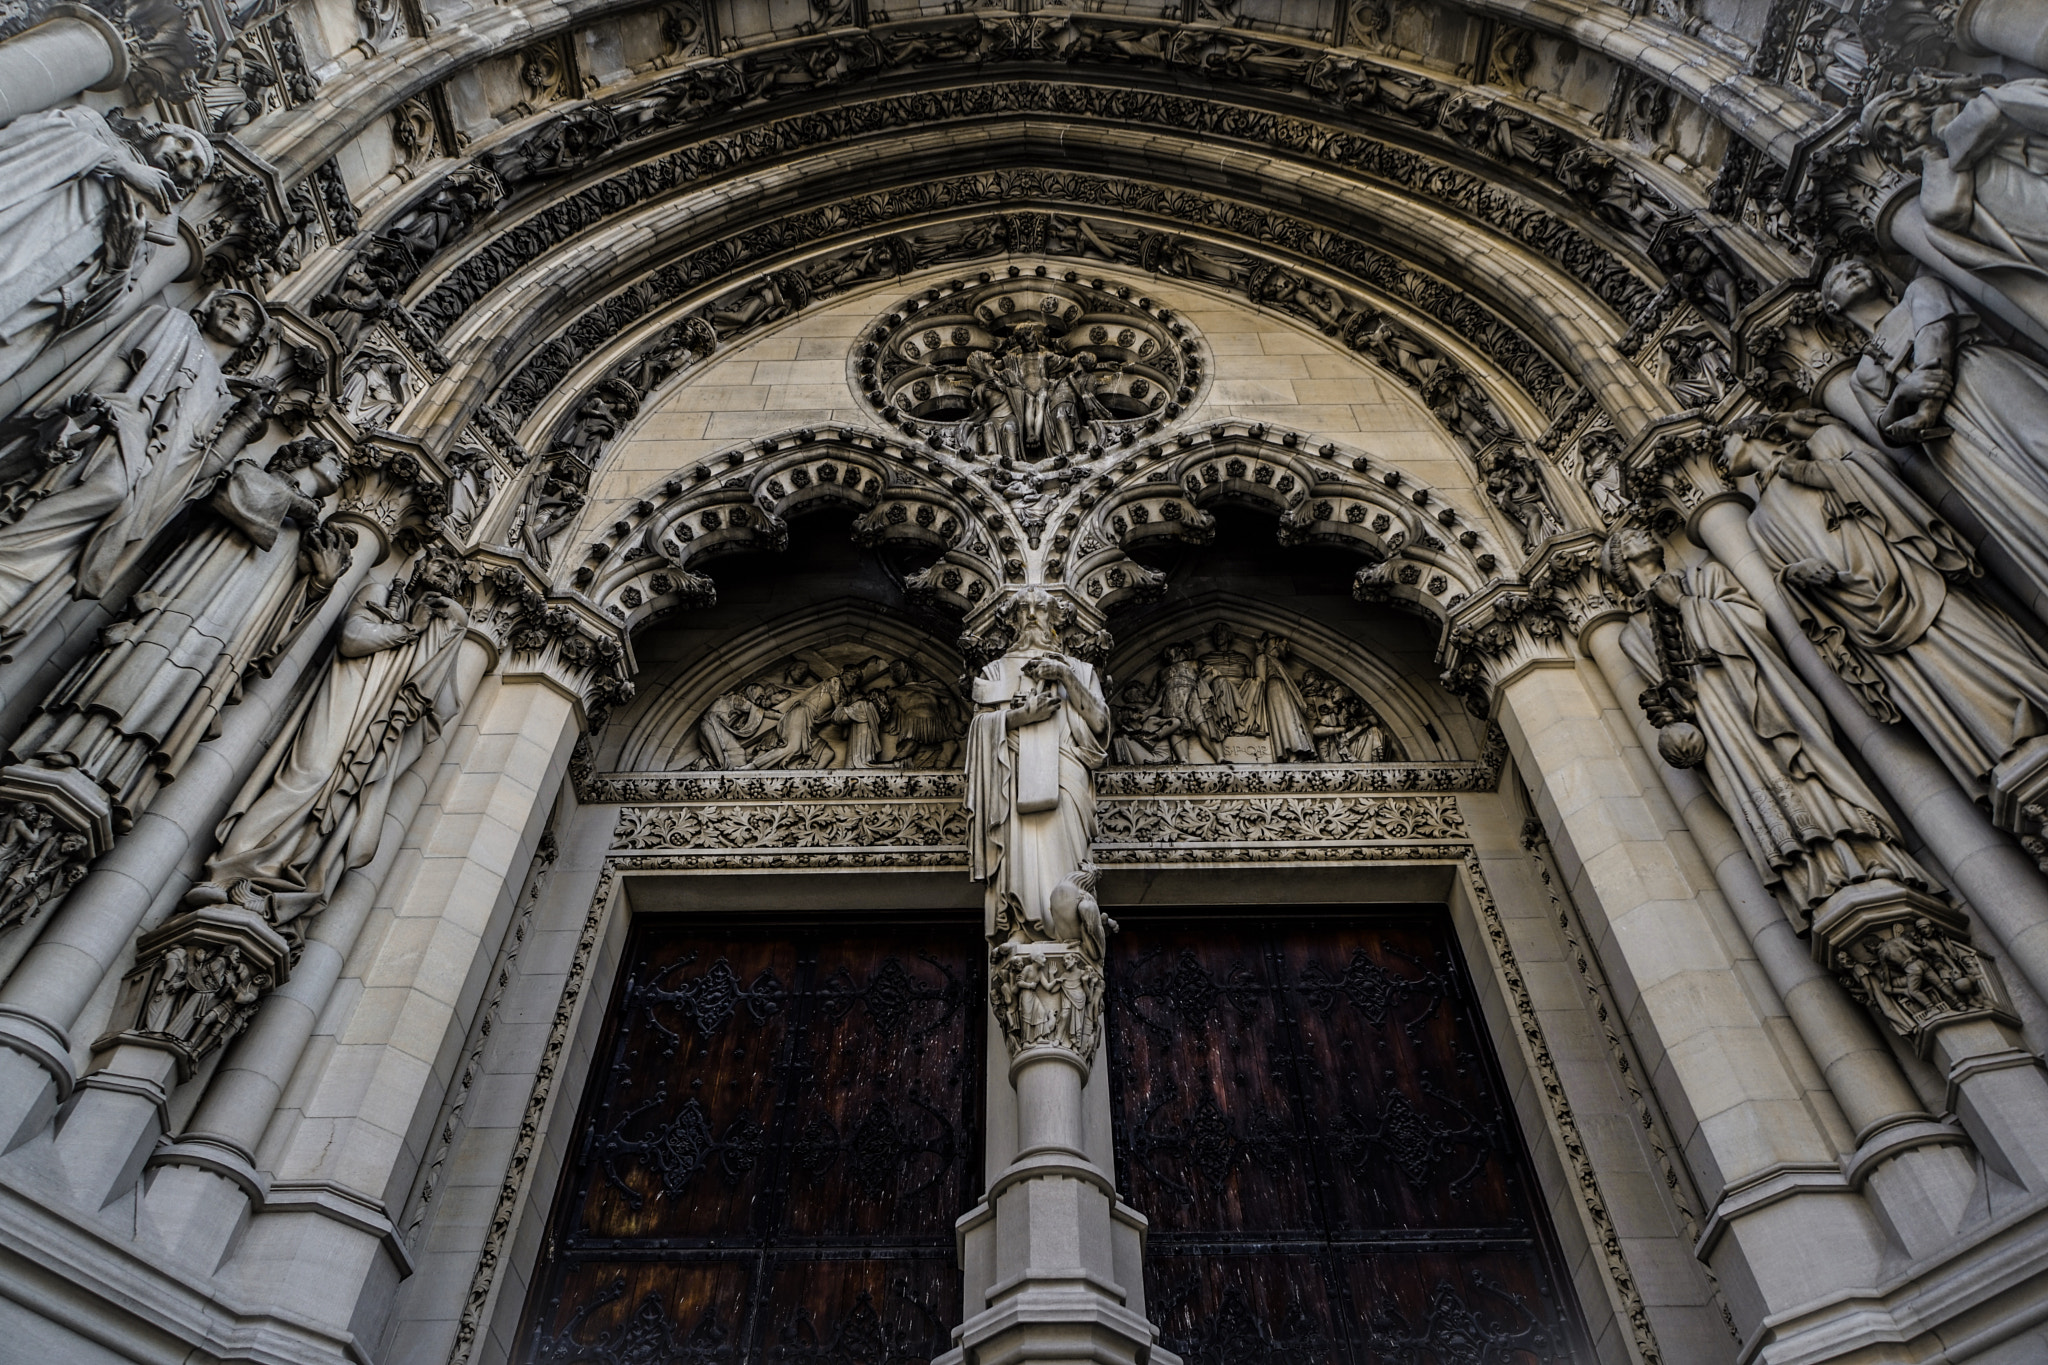 Sony a7 sample photo. The cathedral church of st. john the divine photography